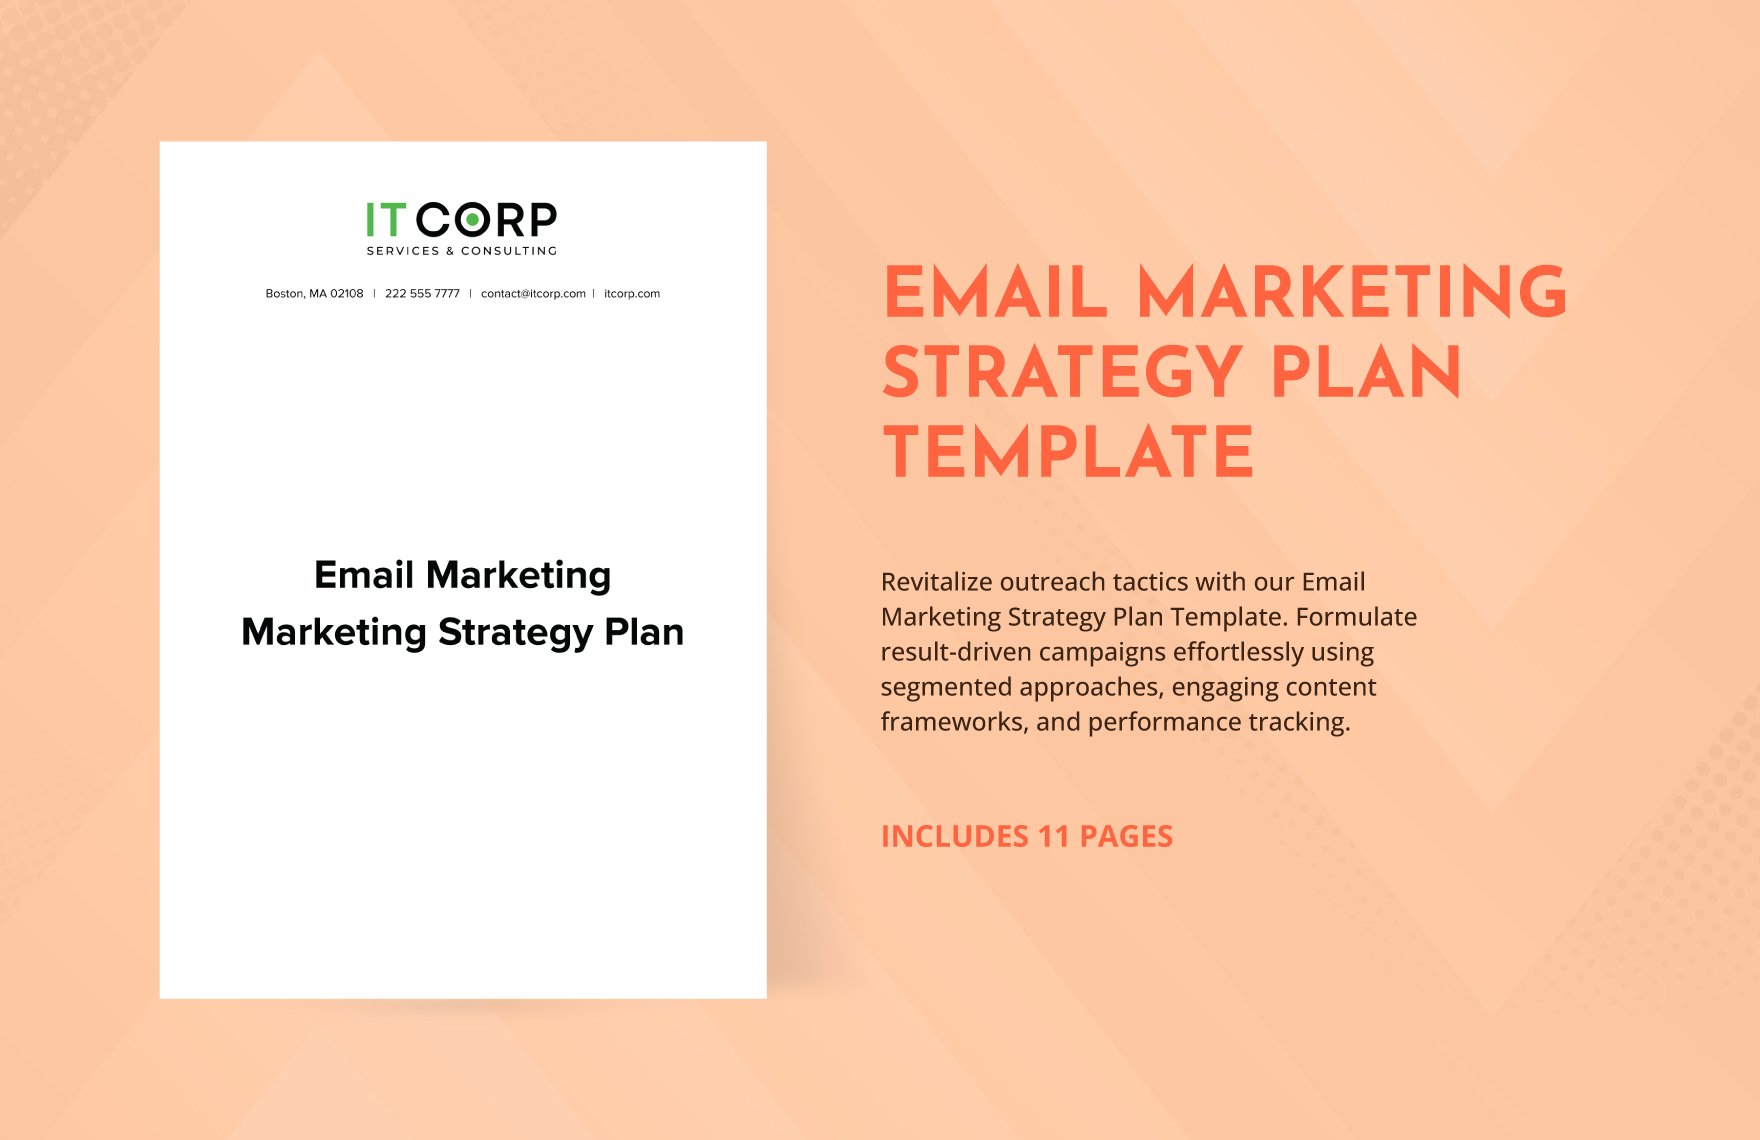 Email Marketing Marketing Strategy Plan Template